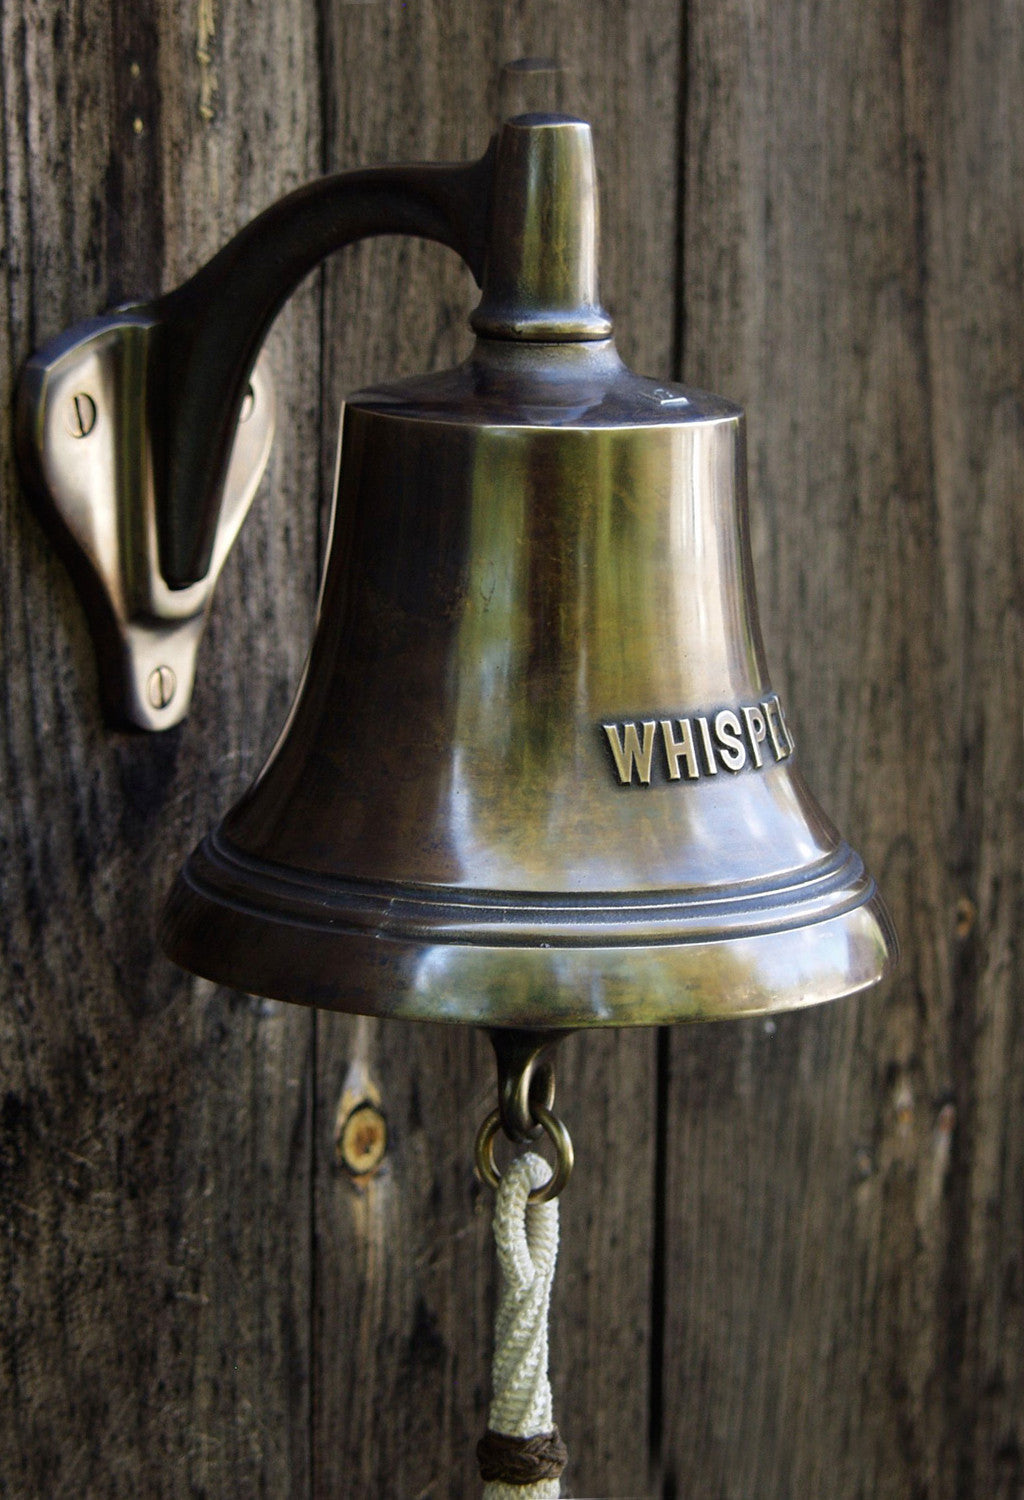 Yacht Bell – Solid Brass 8 Fog Bell | Ship Bell | Boat Bell | Wonderful  Tone with a Loud and Long Ring | Hanging Bell | Highly Polished and  Lacquered